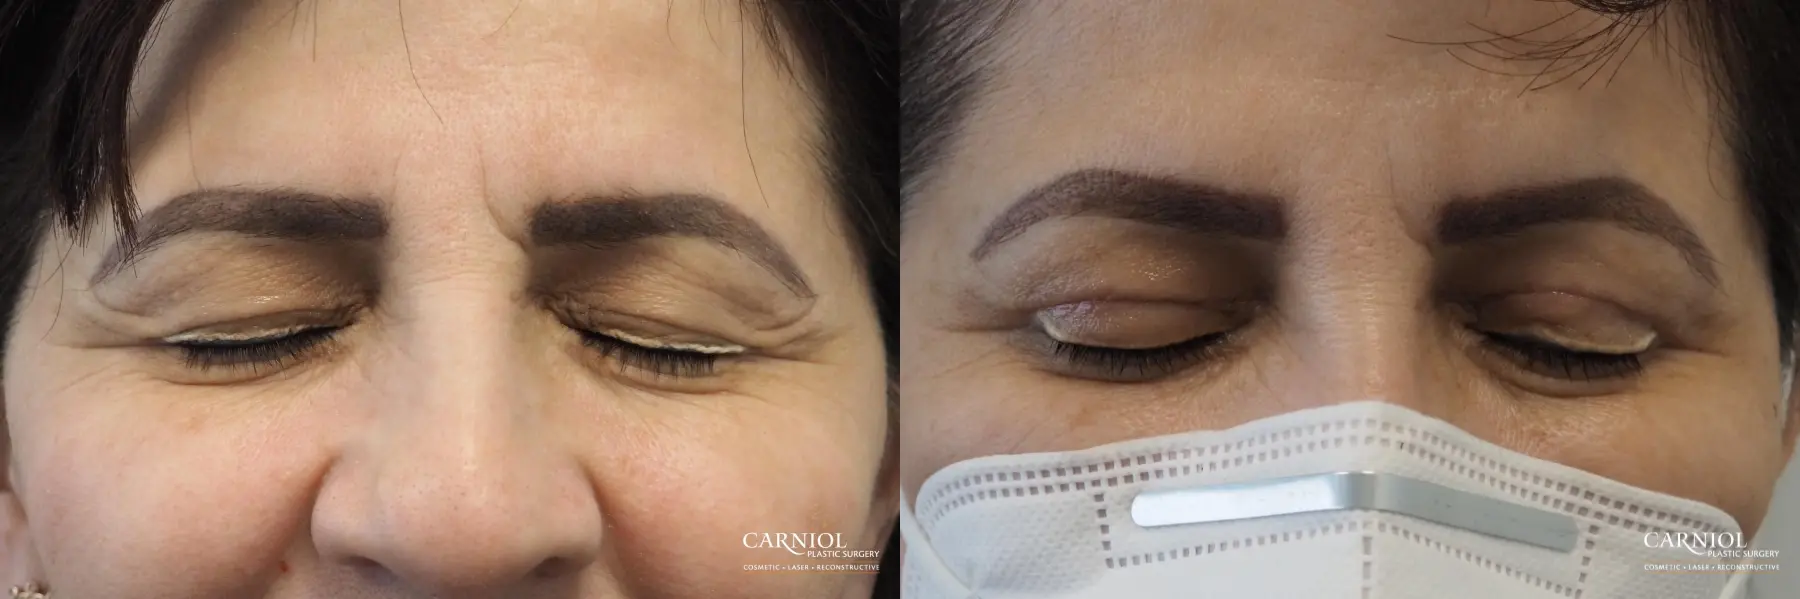 Blepharoplasty: Patient 7 - Before and After 2